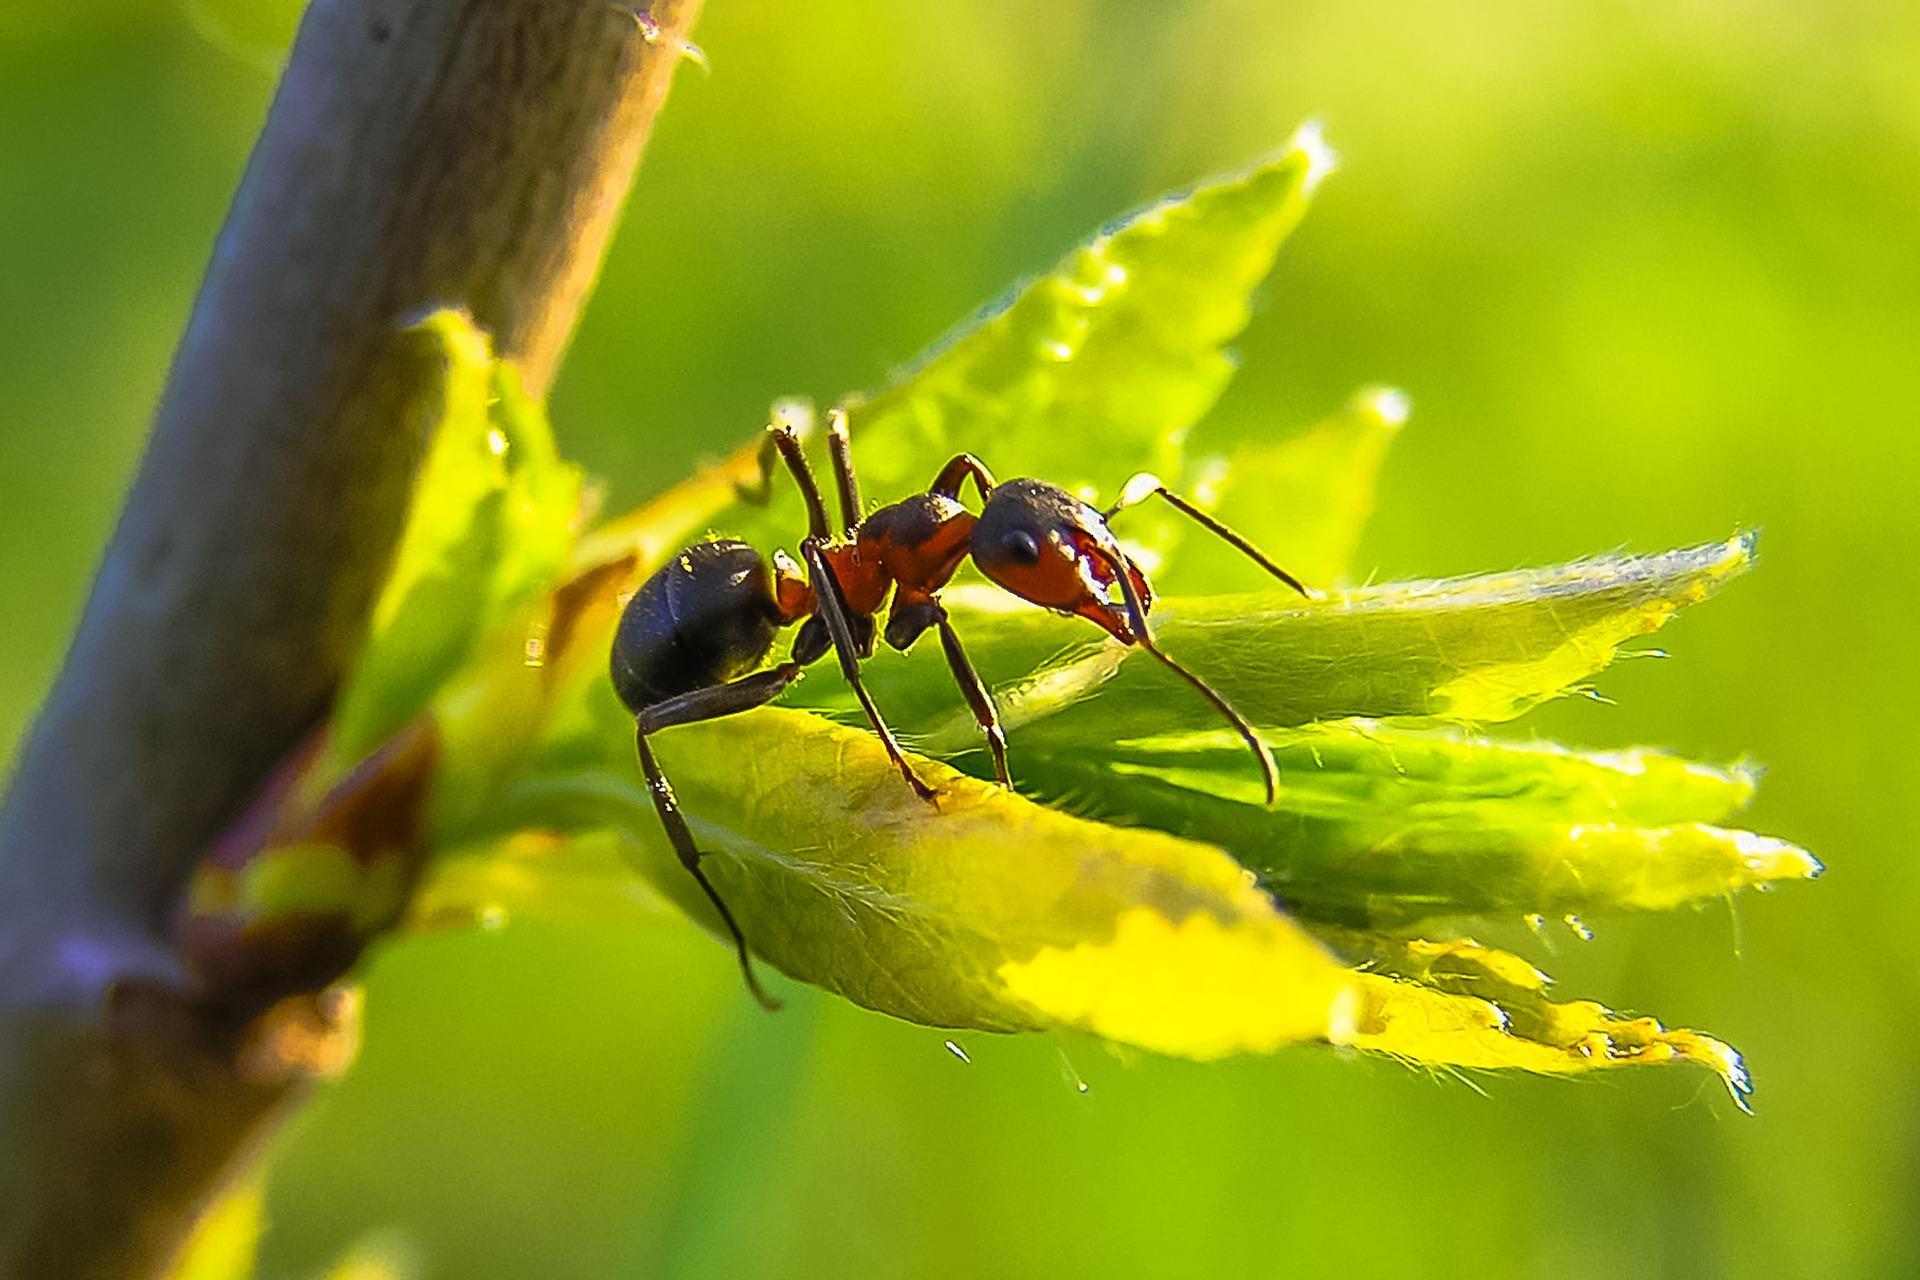 Ant Wallpaper HD for Android - APK Download